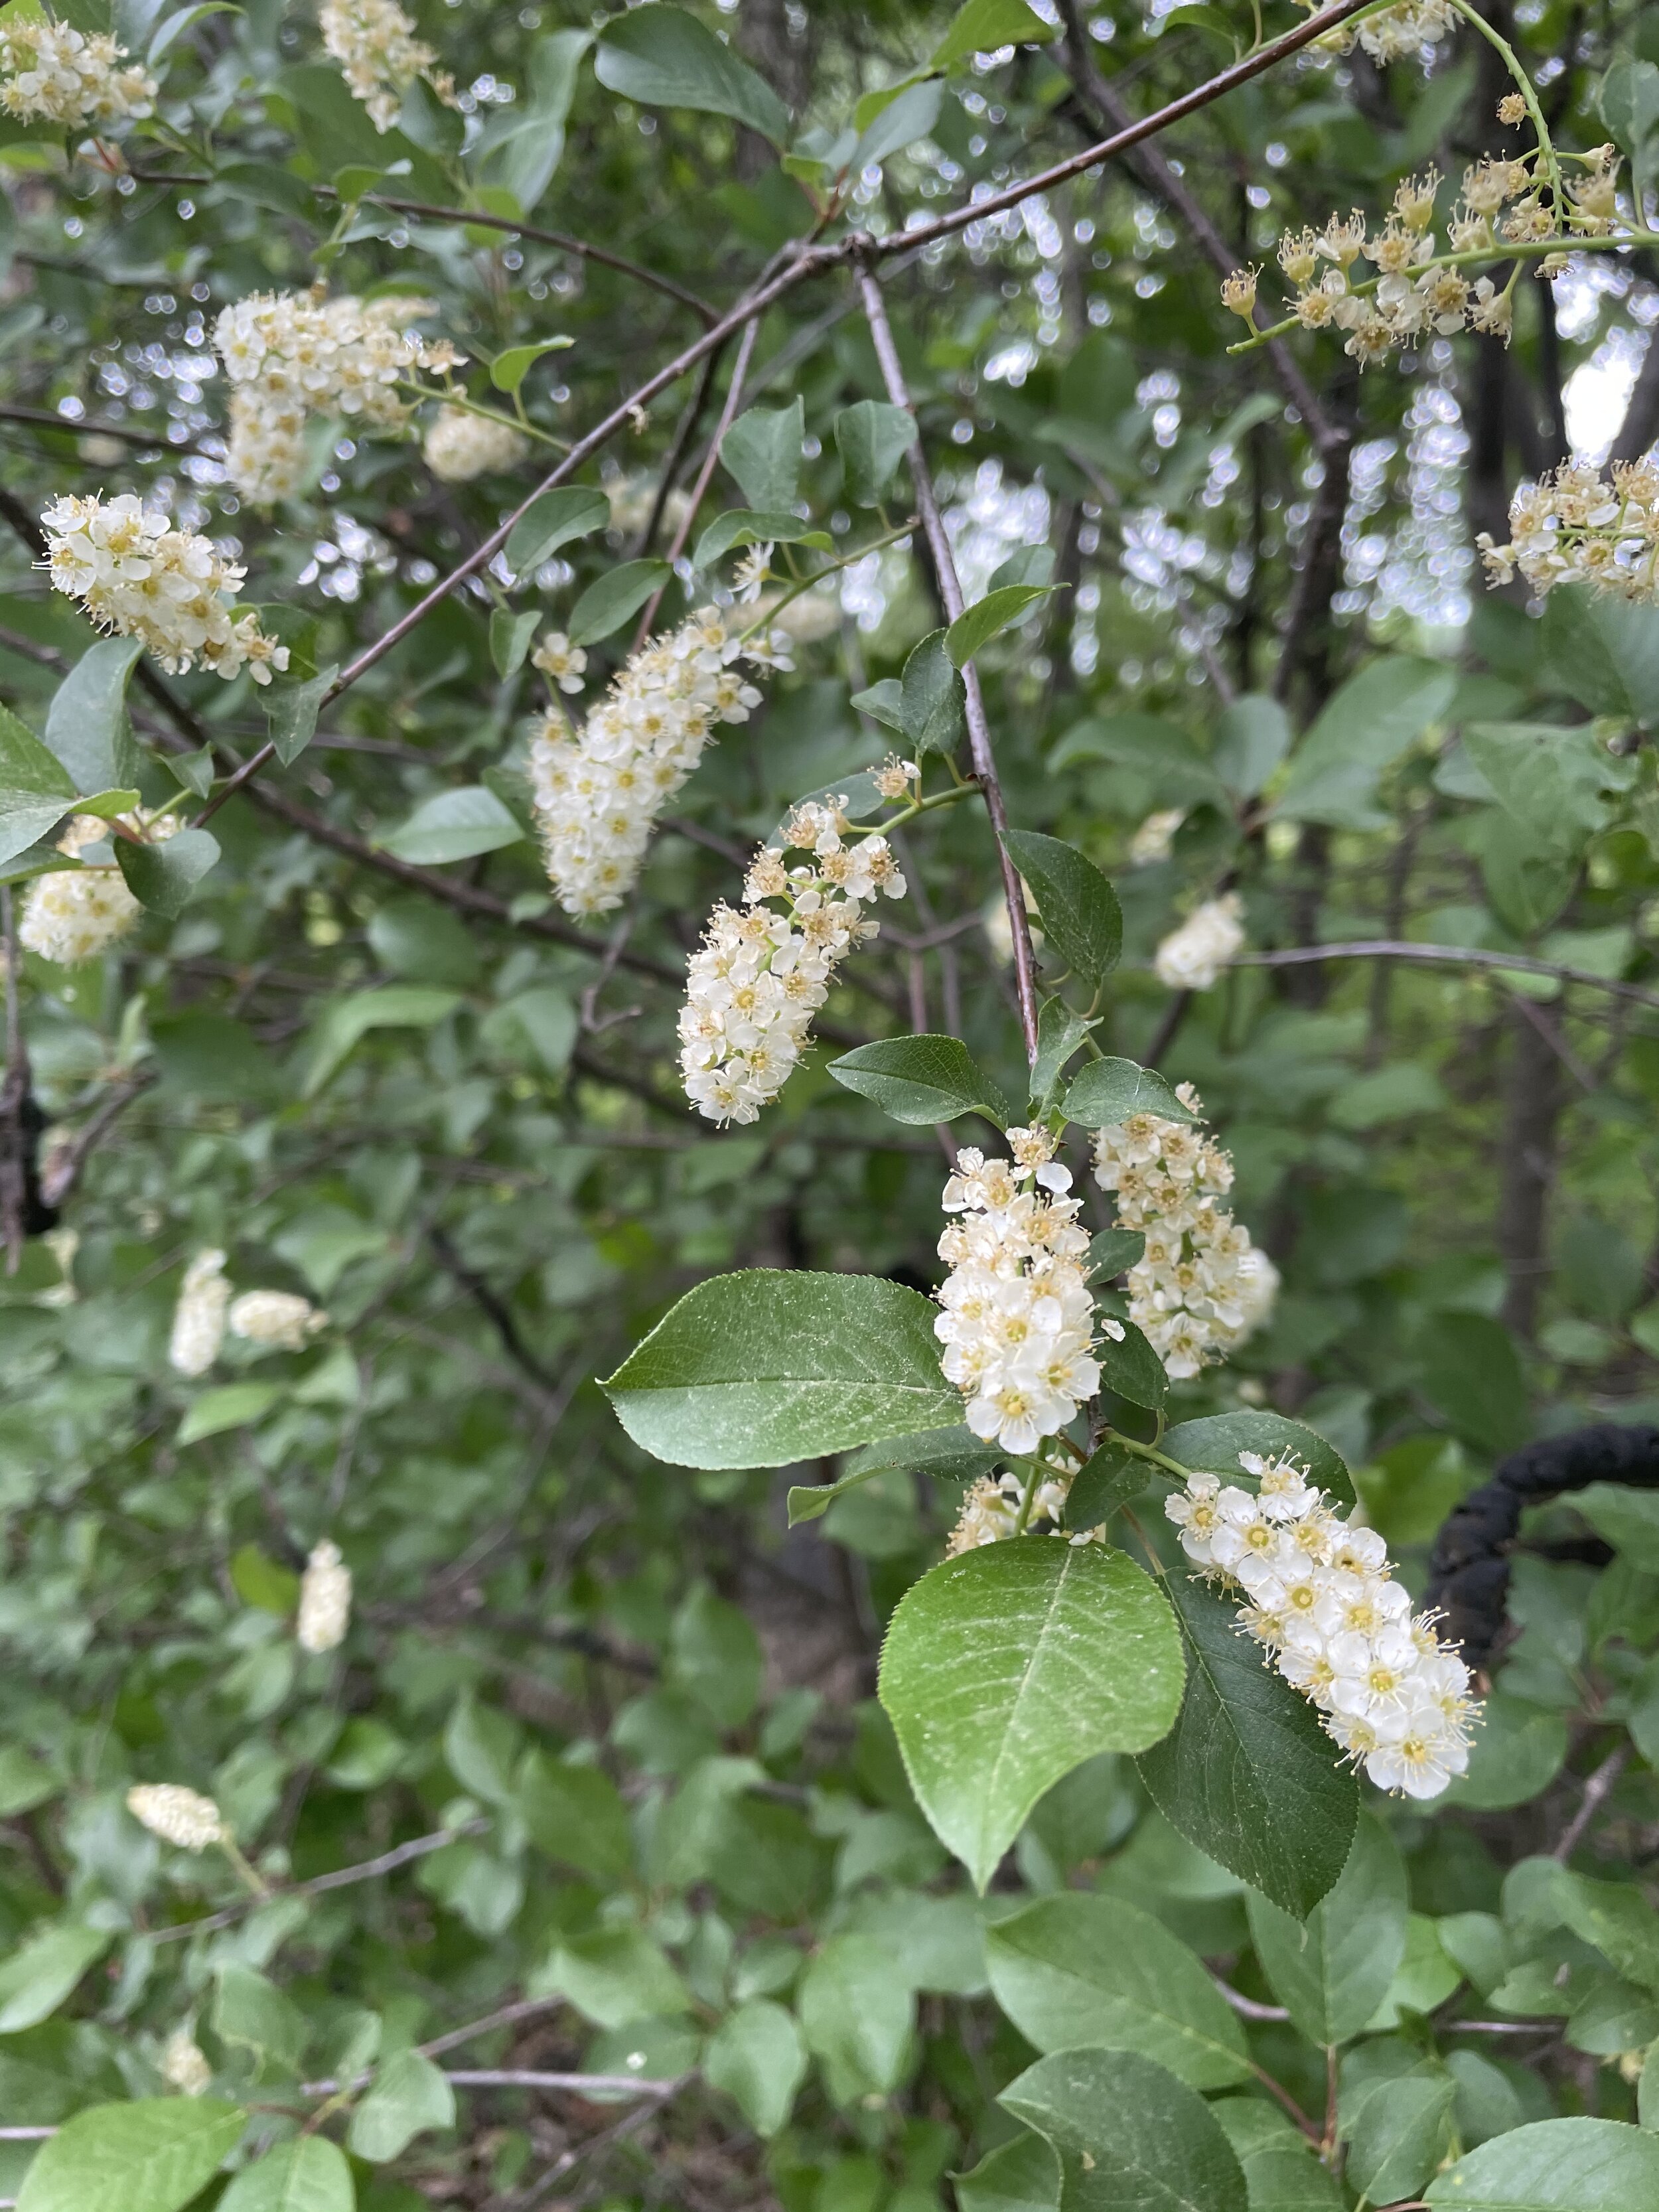  Choke Cherry blossoms - This Fall maybe we will make a sauce with the fruits when they are ripe and if the birds leave any for us to sample. 